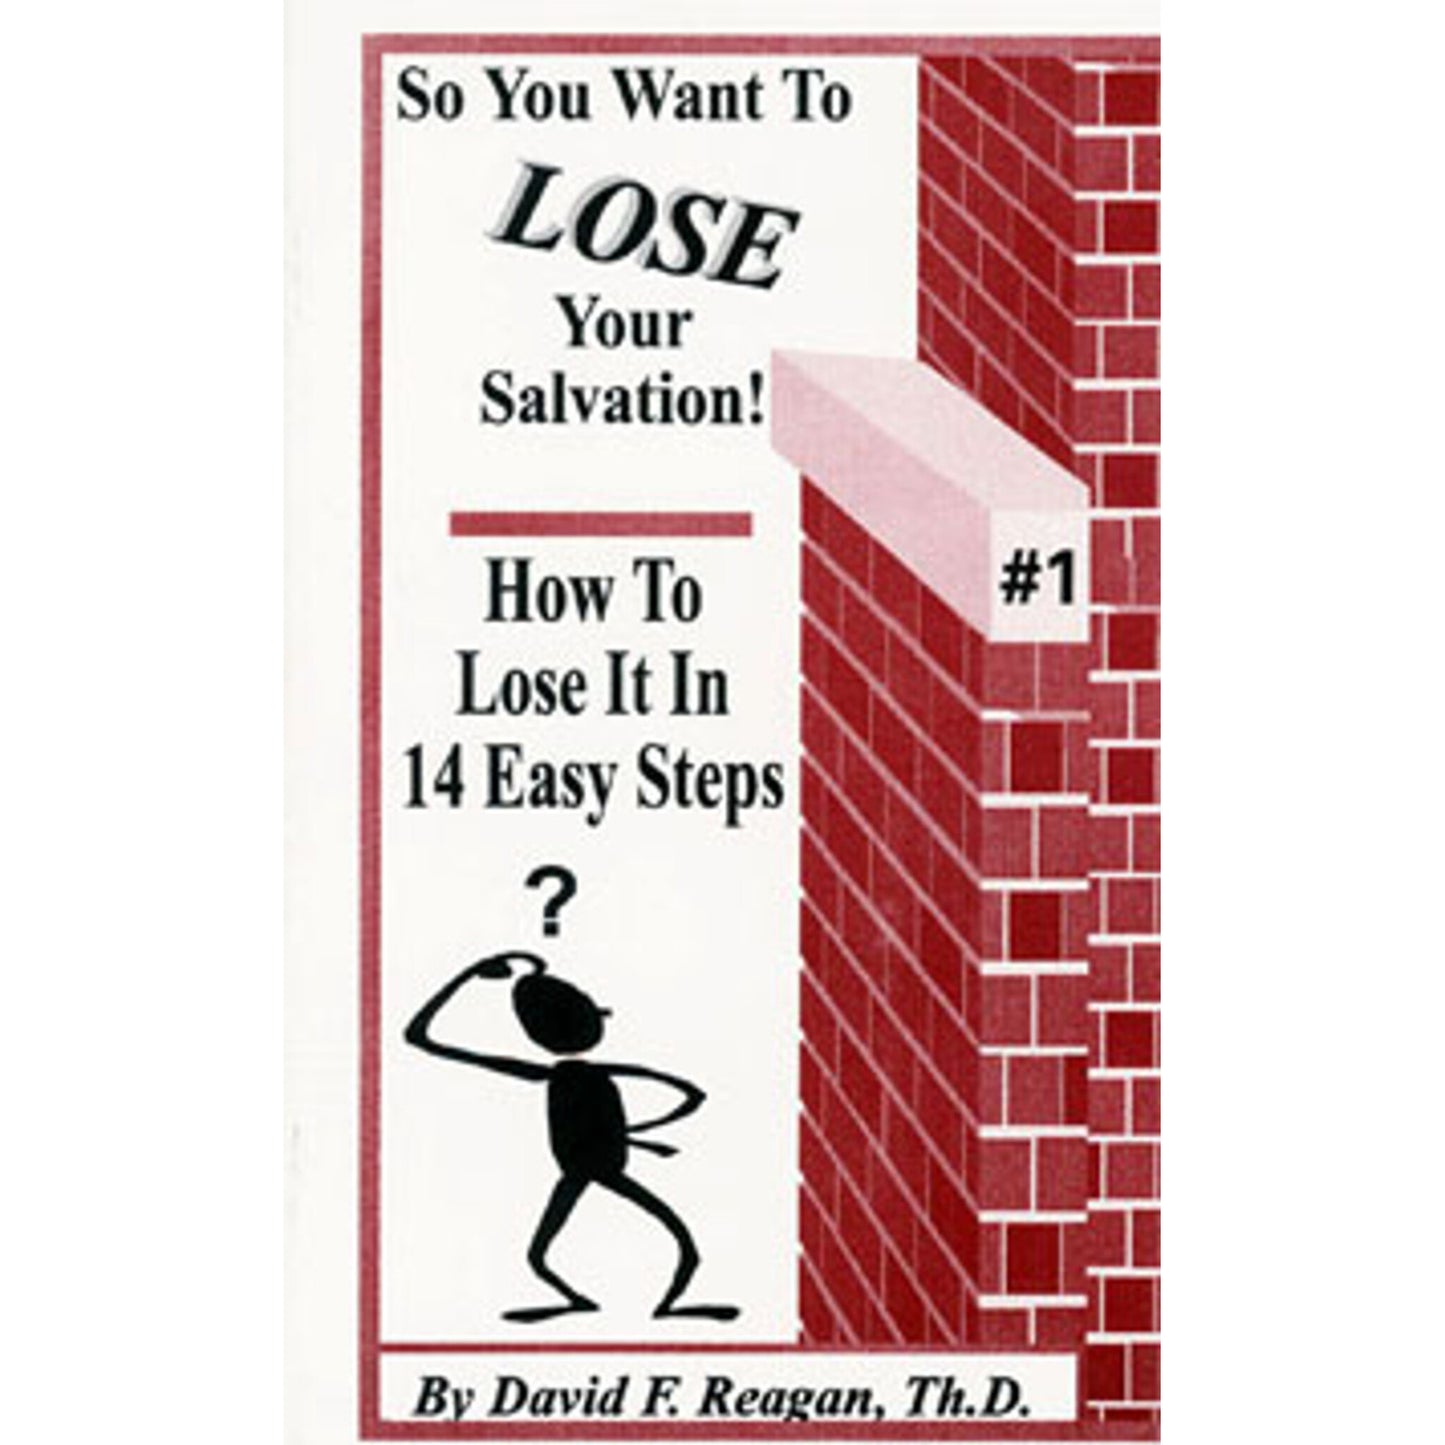 So You Want to Lose Your Salvation? How to Lose It in Fourteen Easy Steps